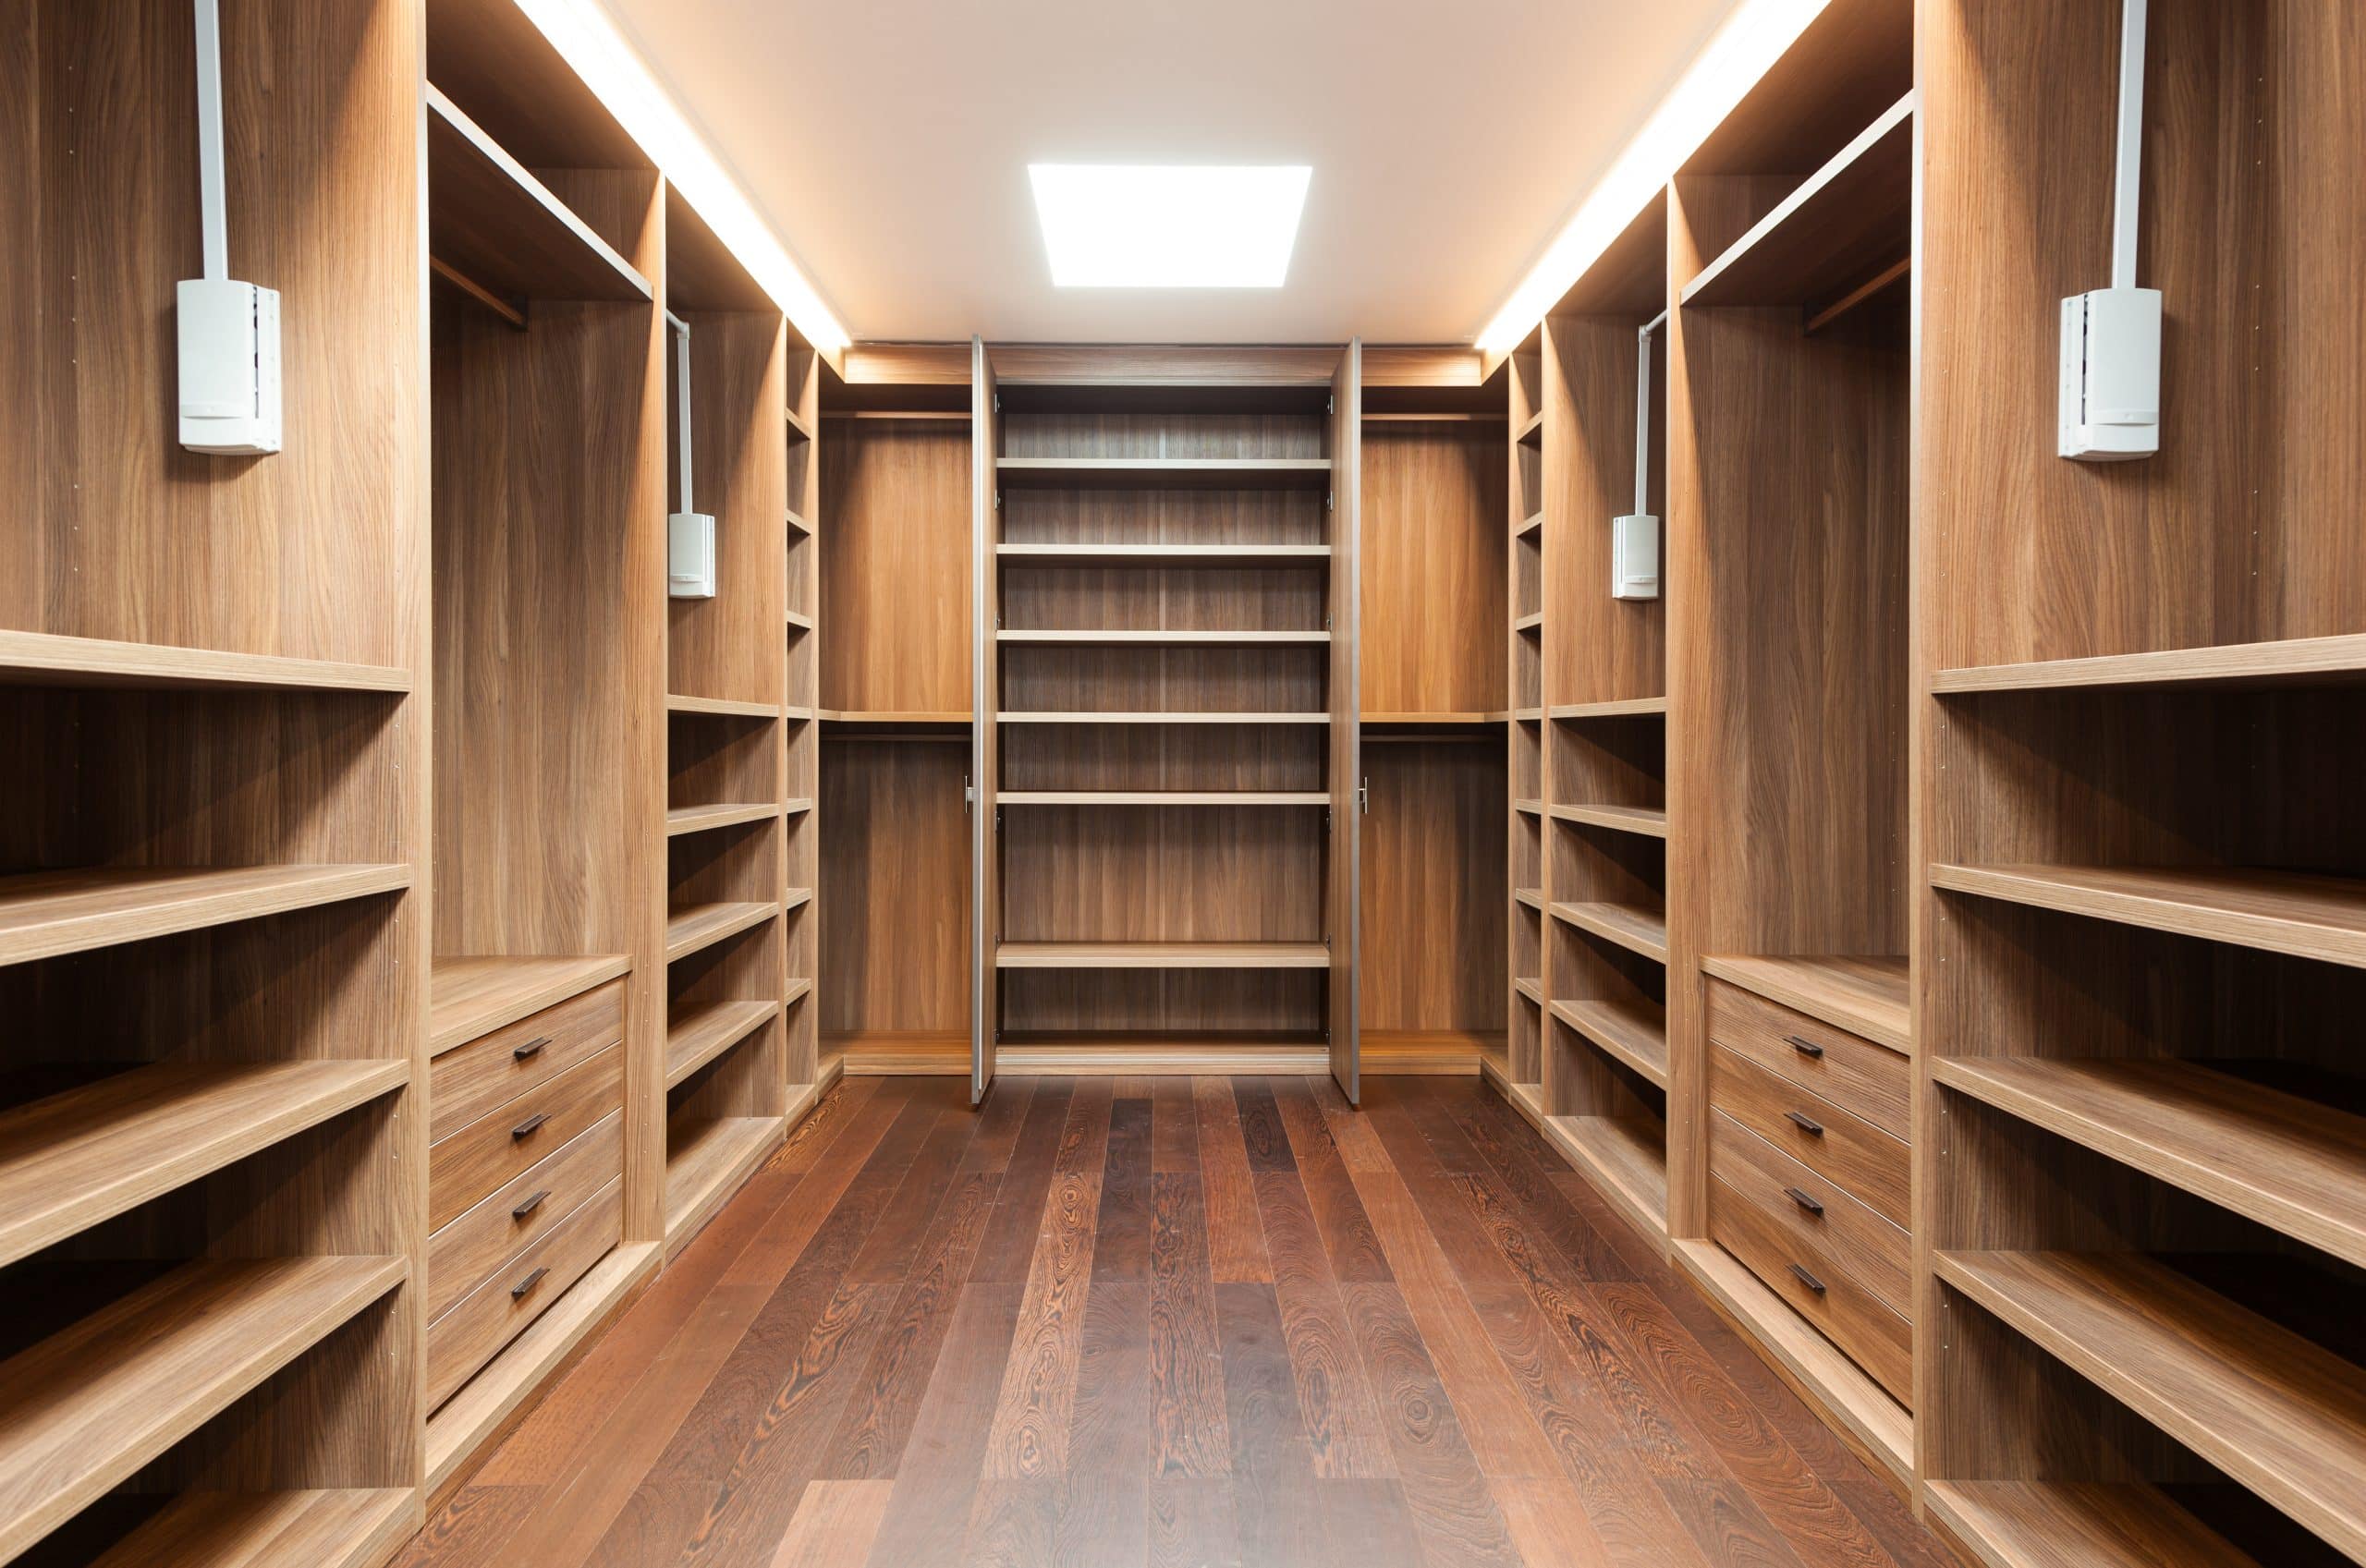 wide wooden dressing room, interior of a modern house